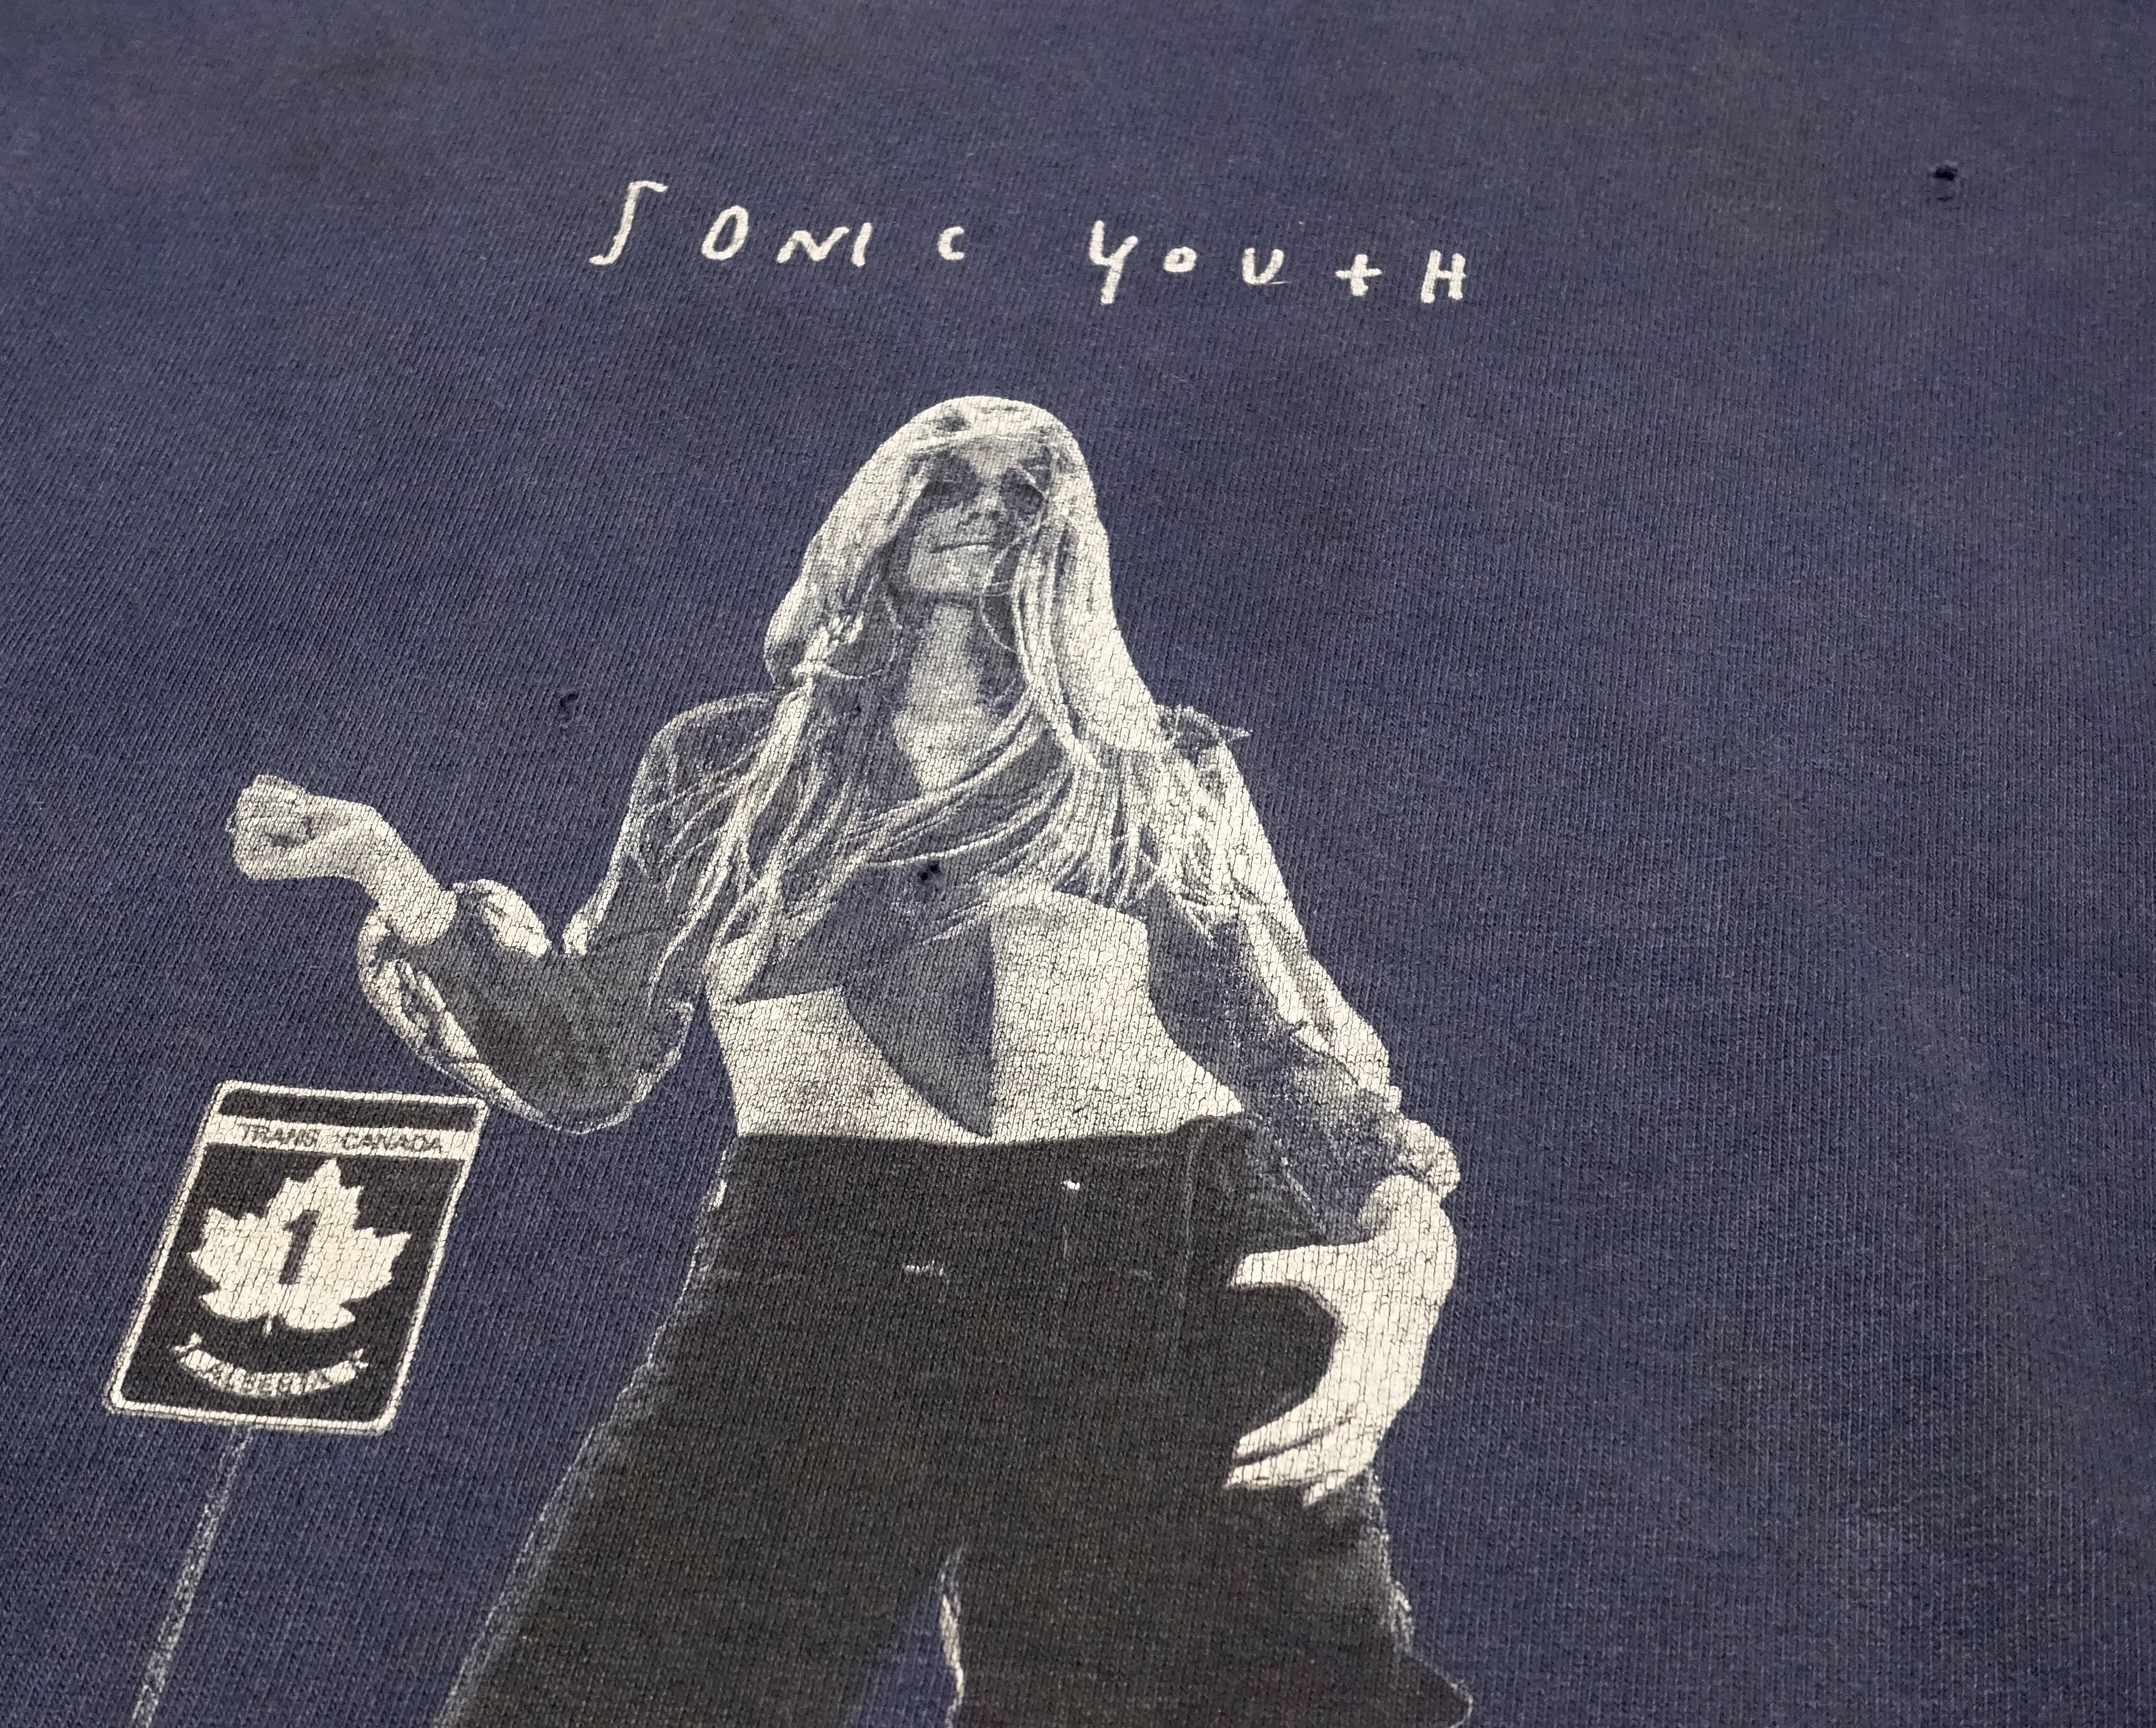 Sonic Youth - Hitchhiker Girl Tour Shirt Size Large